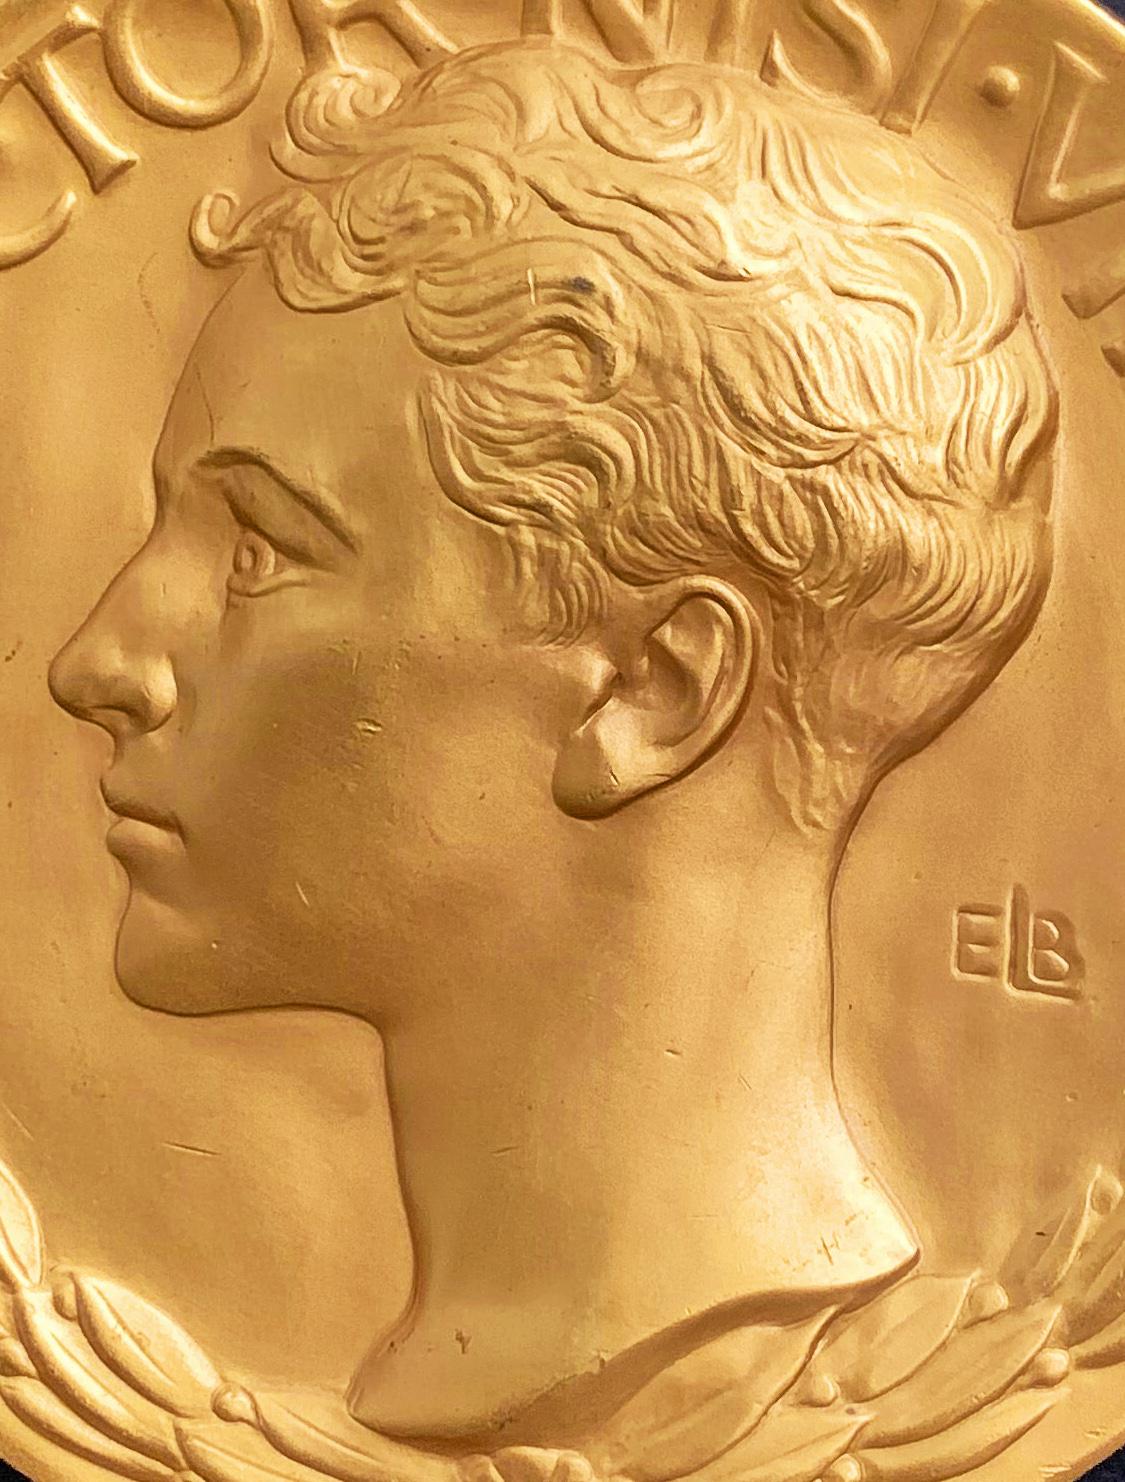 A large and extremely rare example of American bas relief sculpture, this bronze medal plated in gold was sculpted by Evelyn Beatrice Longman for the Loomis Athletic prize sponsored by the Loomis School in Windsor, Connecticut. Longman married the